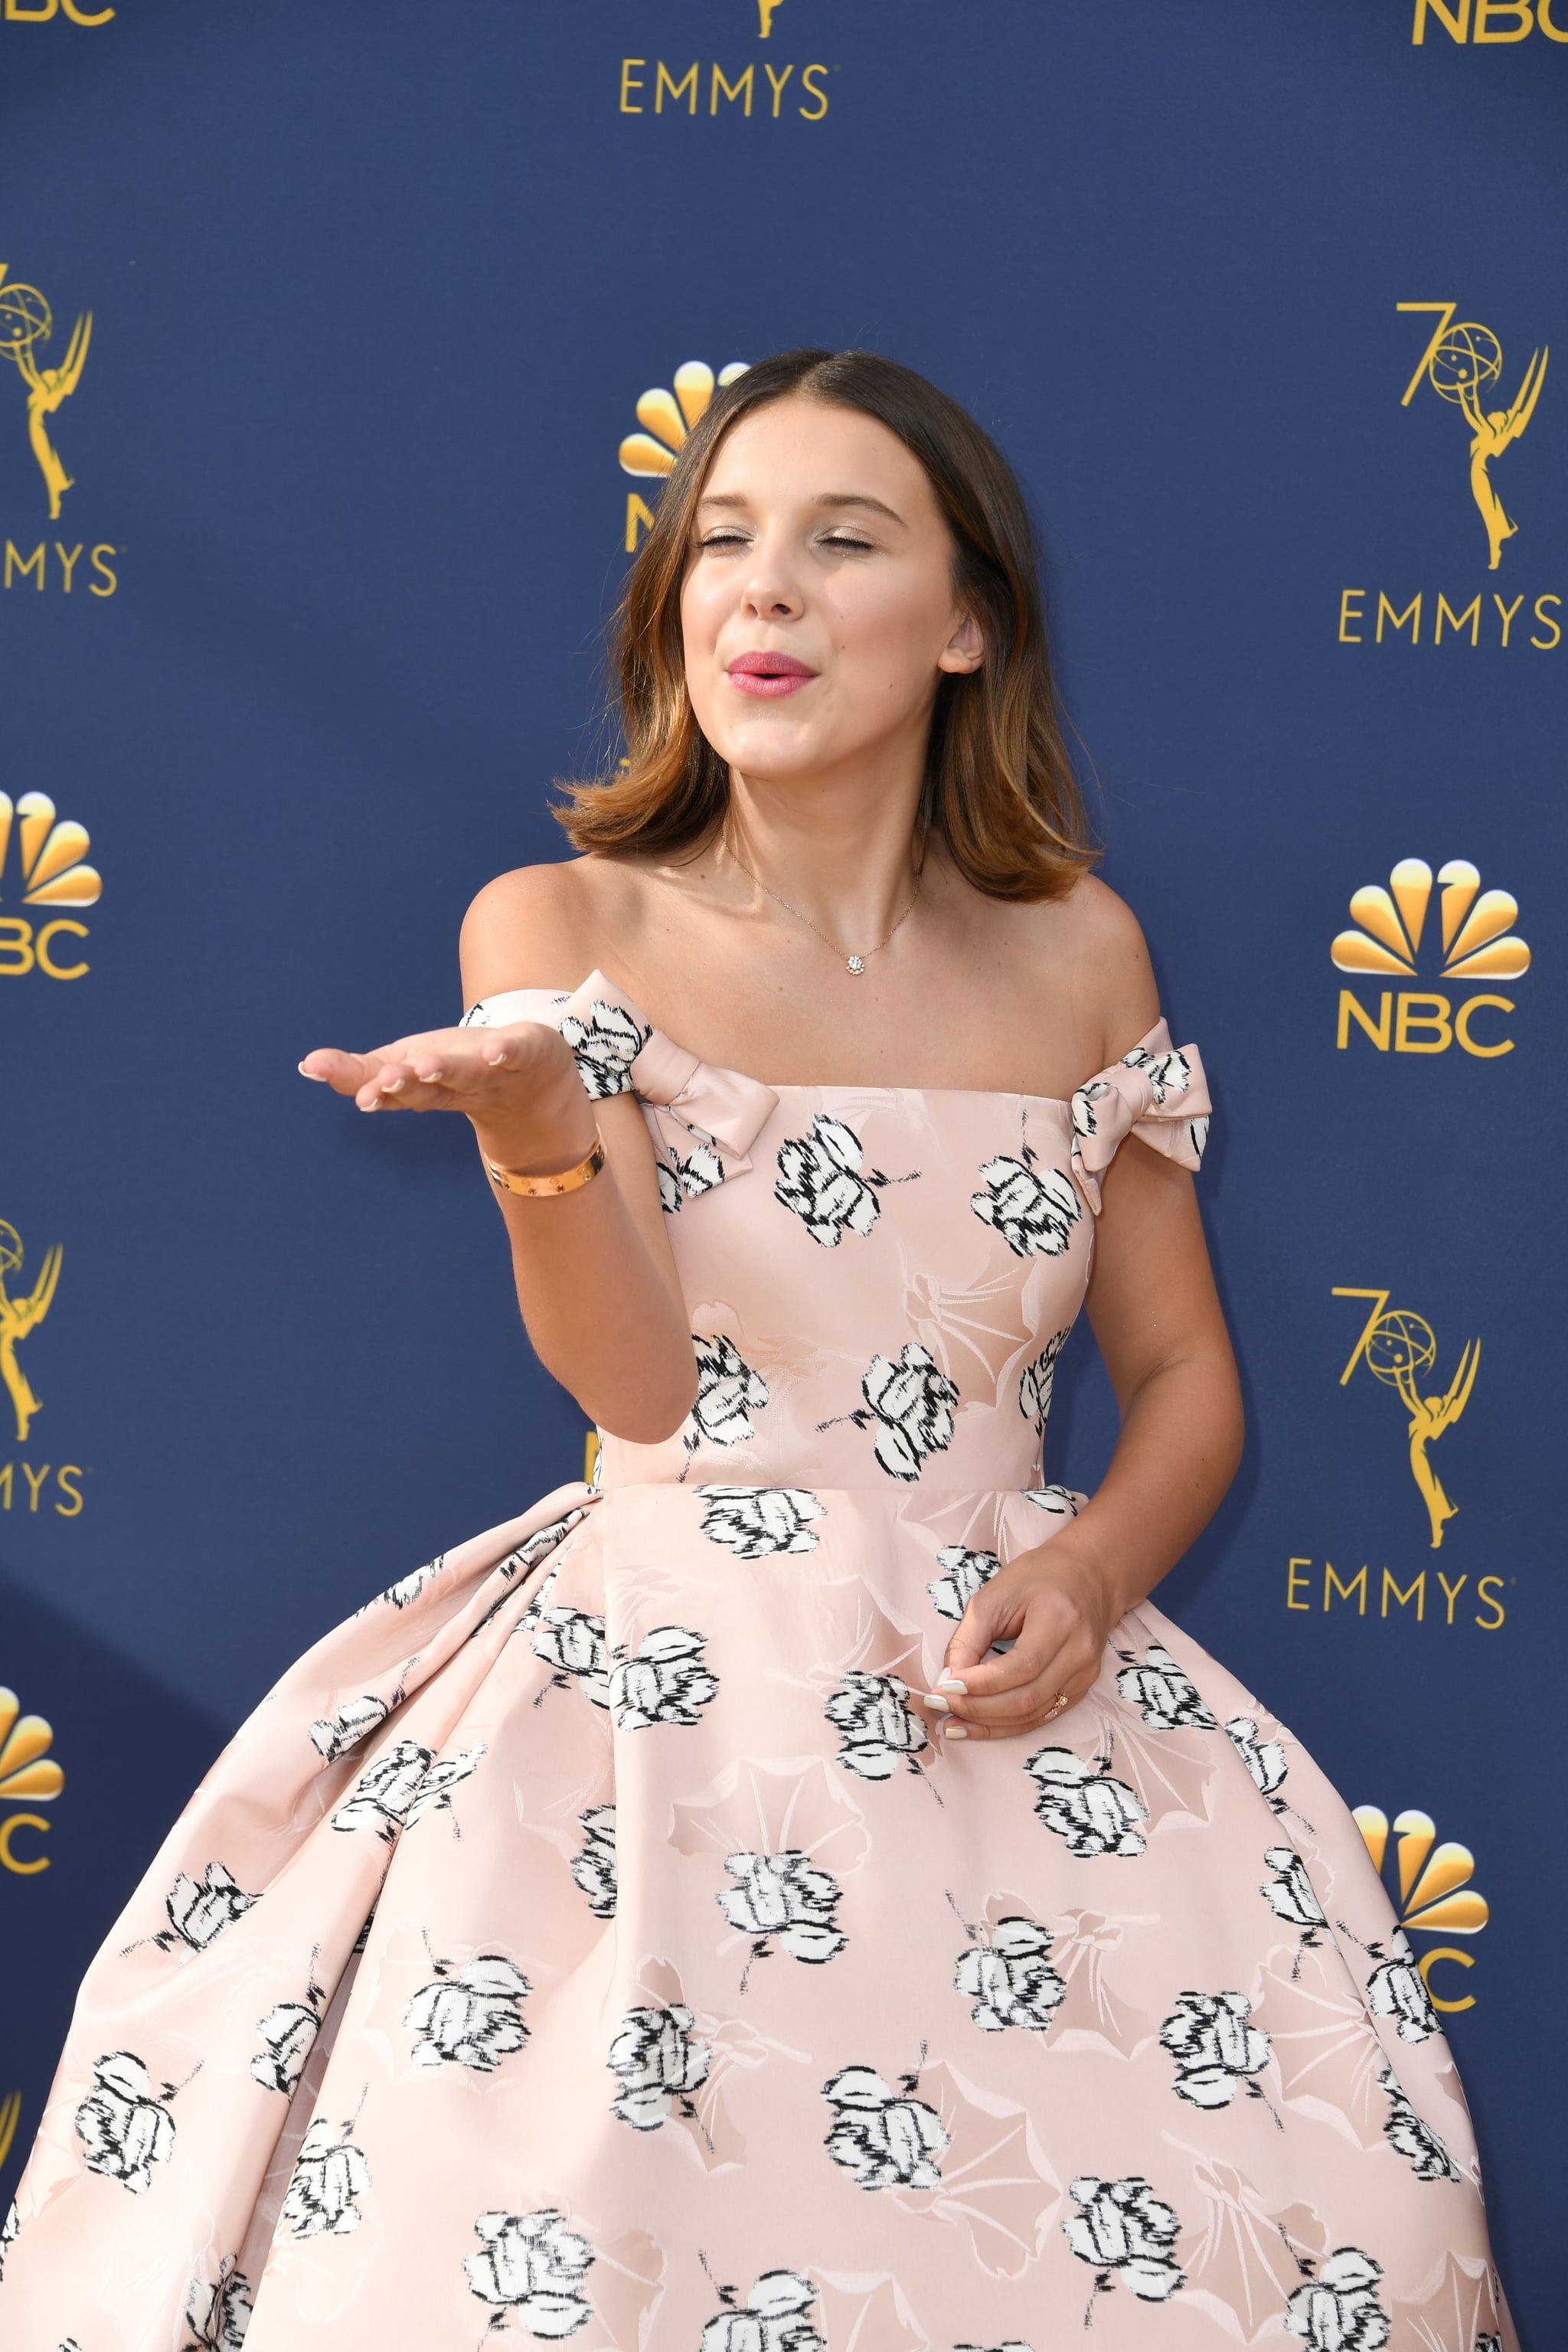 Millie Bobby Brown's Calvin Klein Dress at the 2018 Emmys